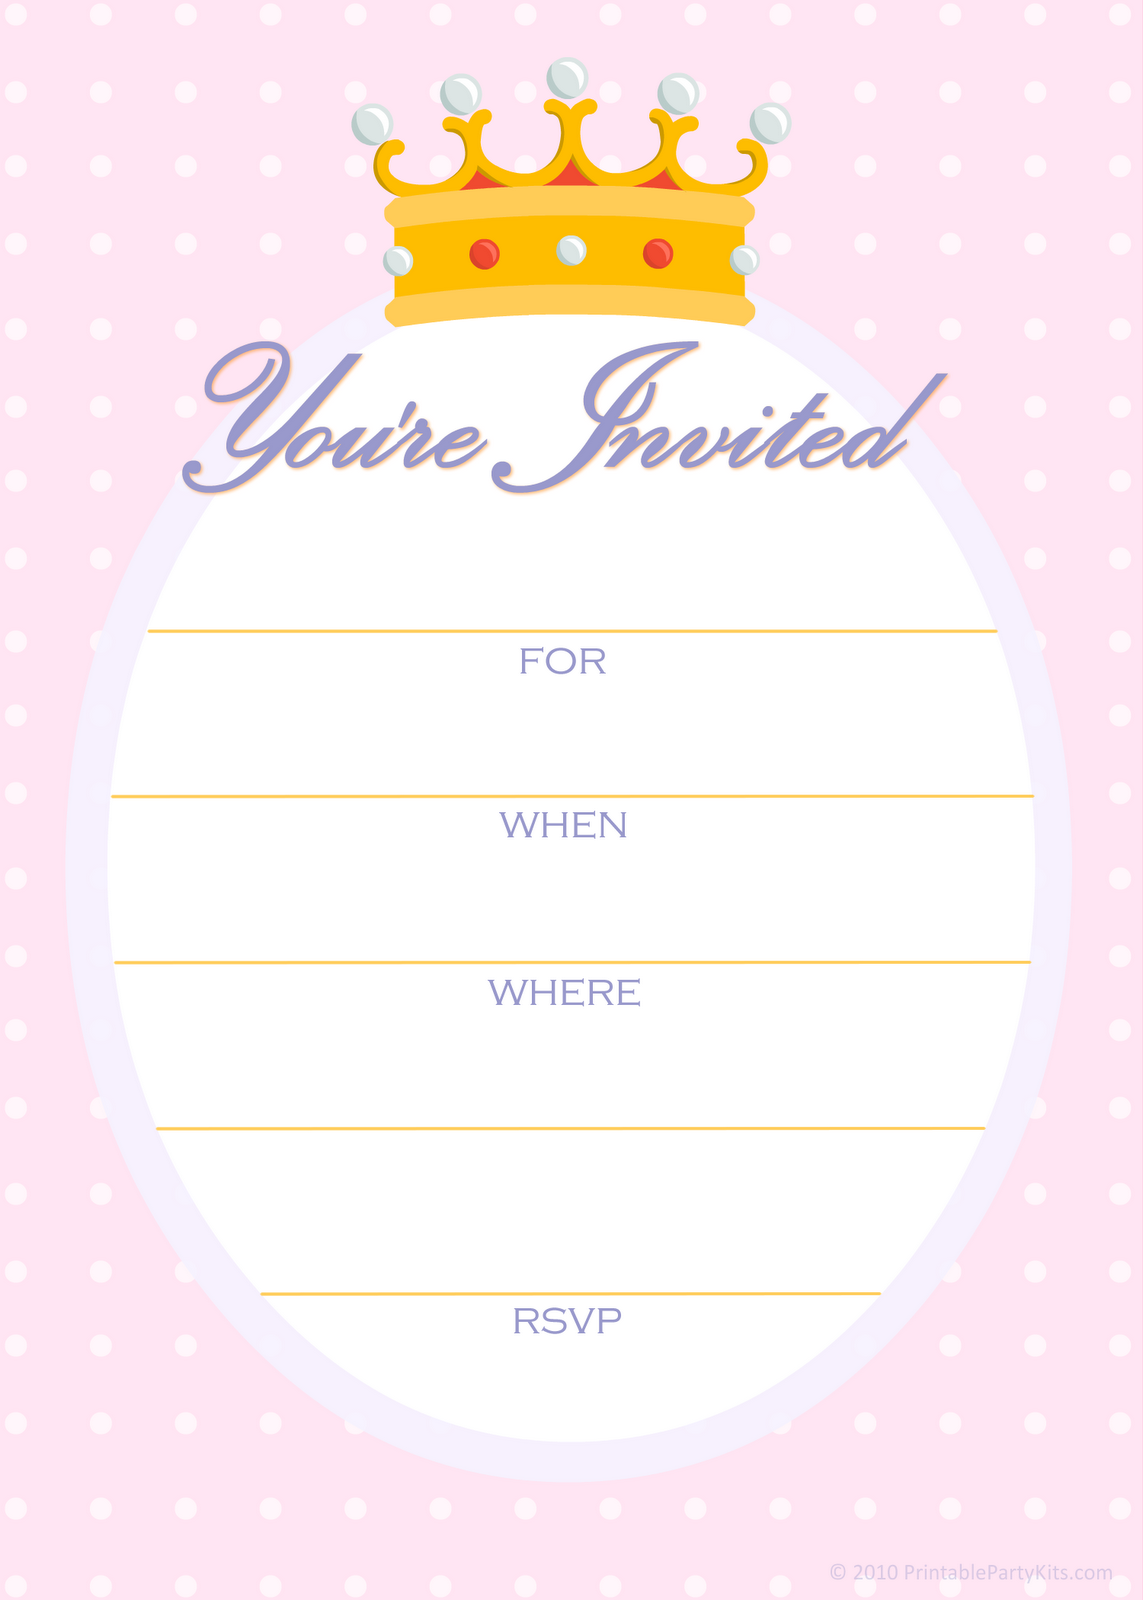 10 Best Images of Printable Blank Party Invitations Free Blank